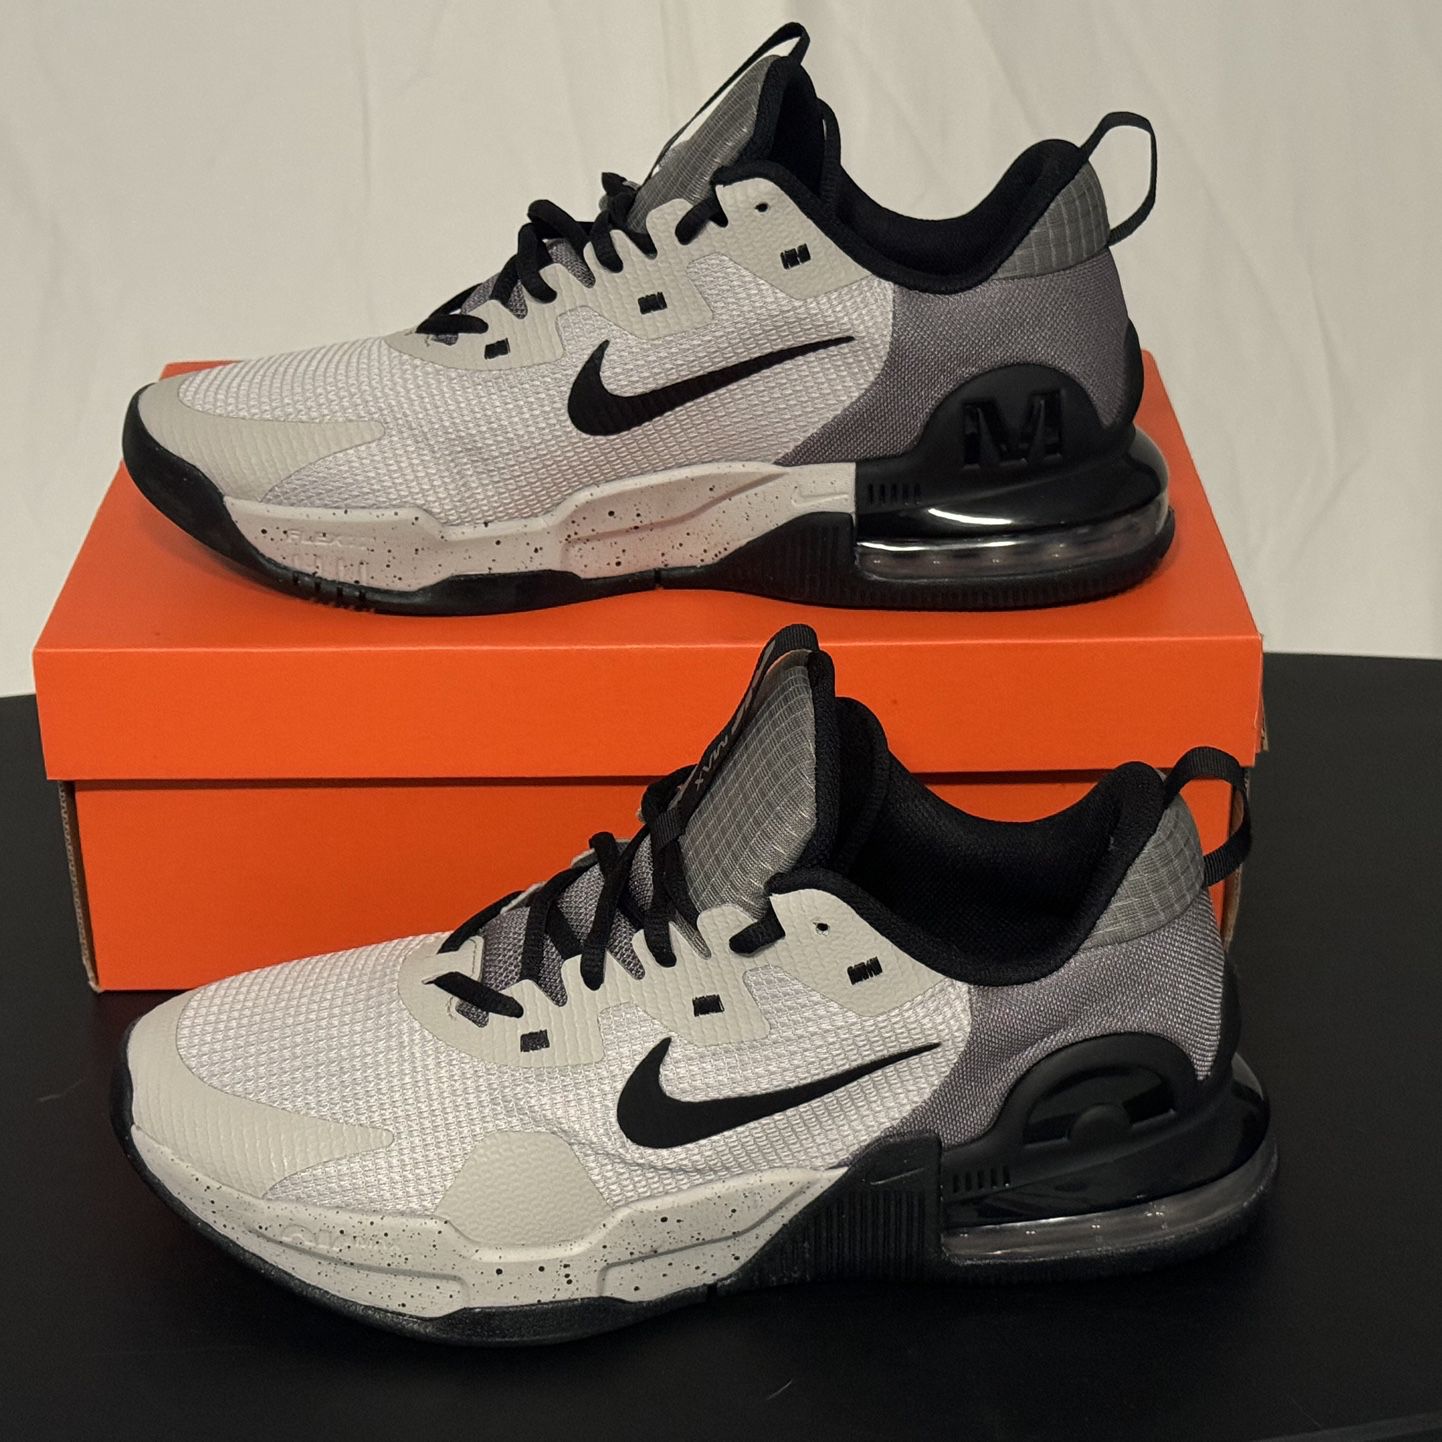 Nike Air Max Alpha Trainer 5 LT Iron Ore / Black-Flat Pewter Size 11